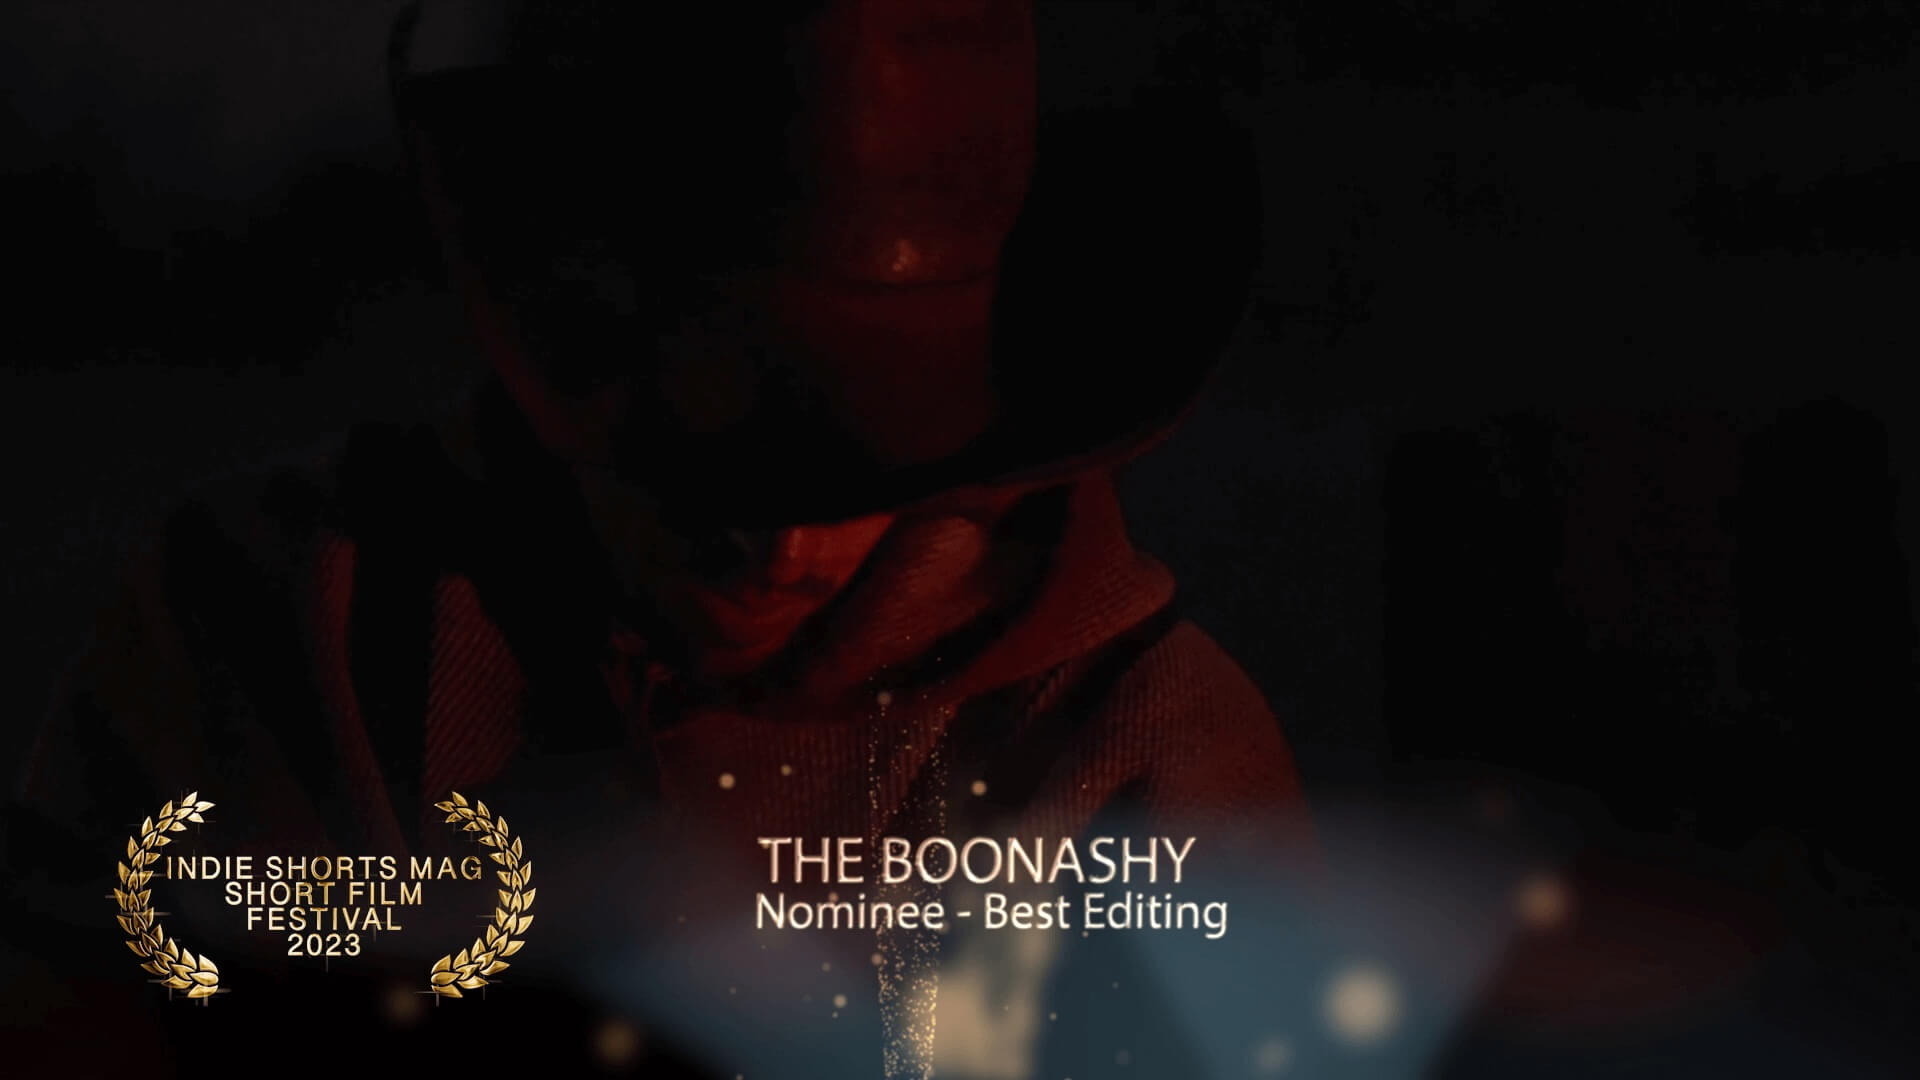 Indie Shorts Mag Short Film Festival - Best Editing - Nominee - The Boonashy